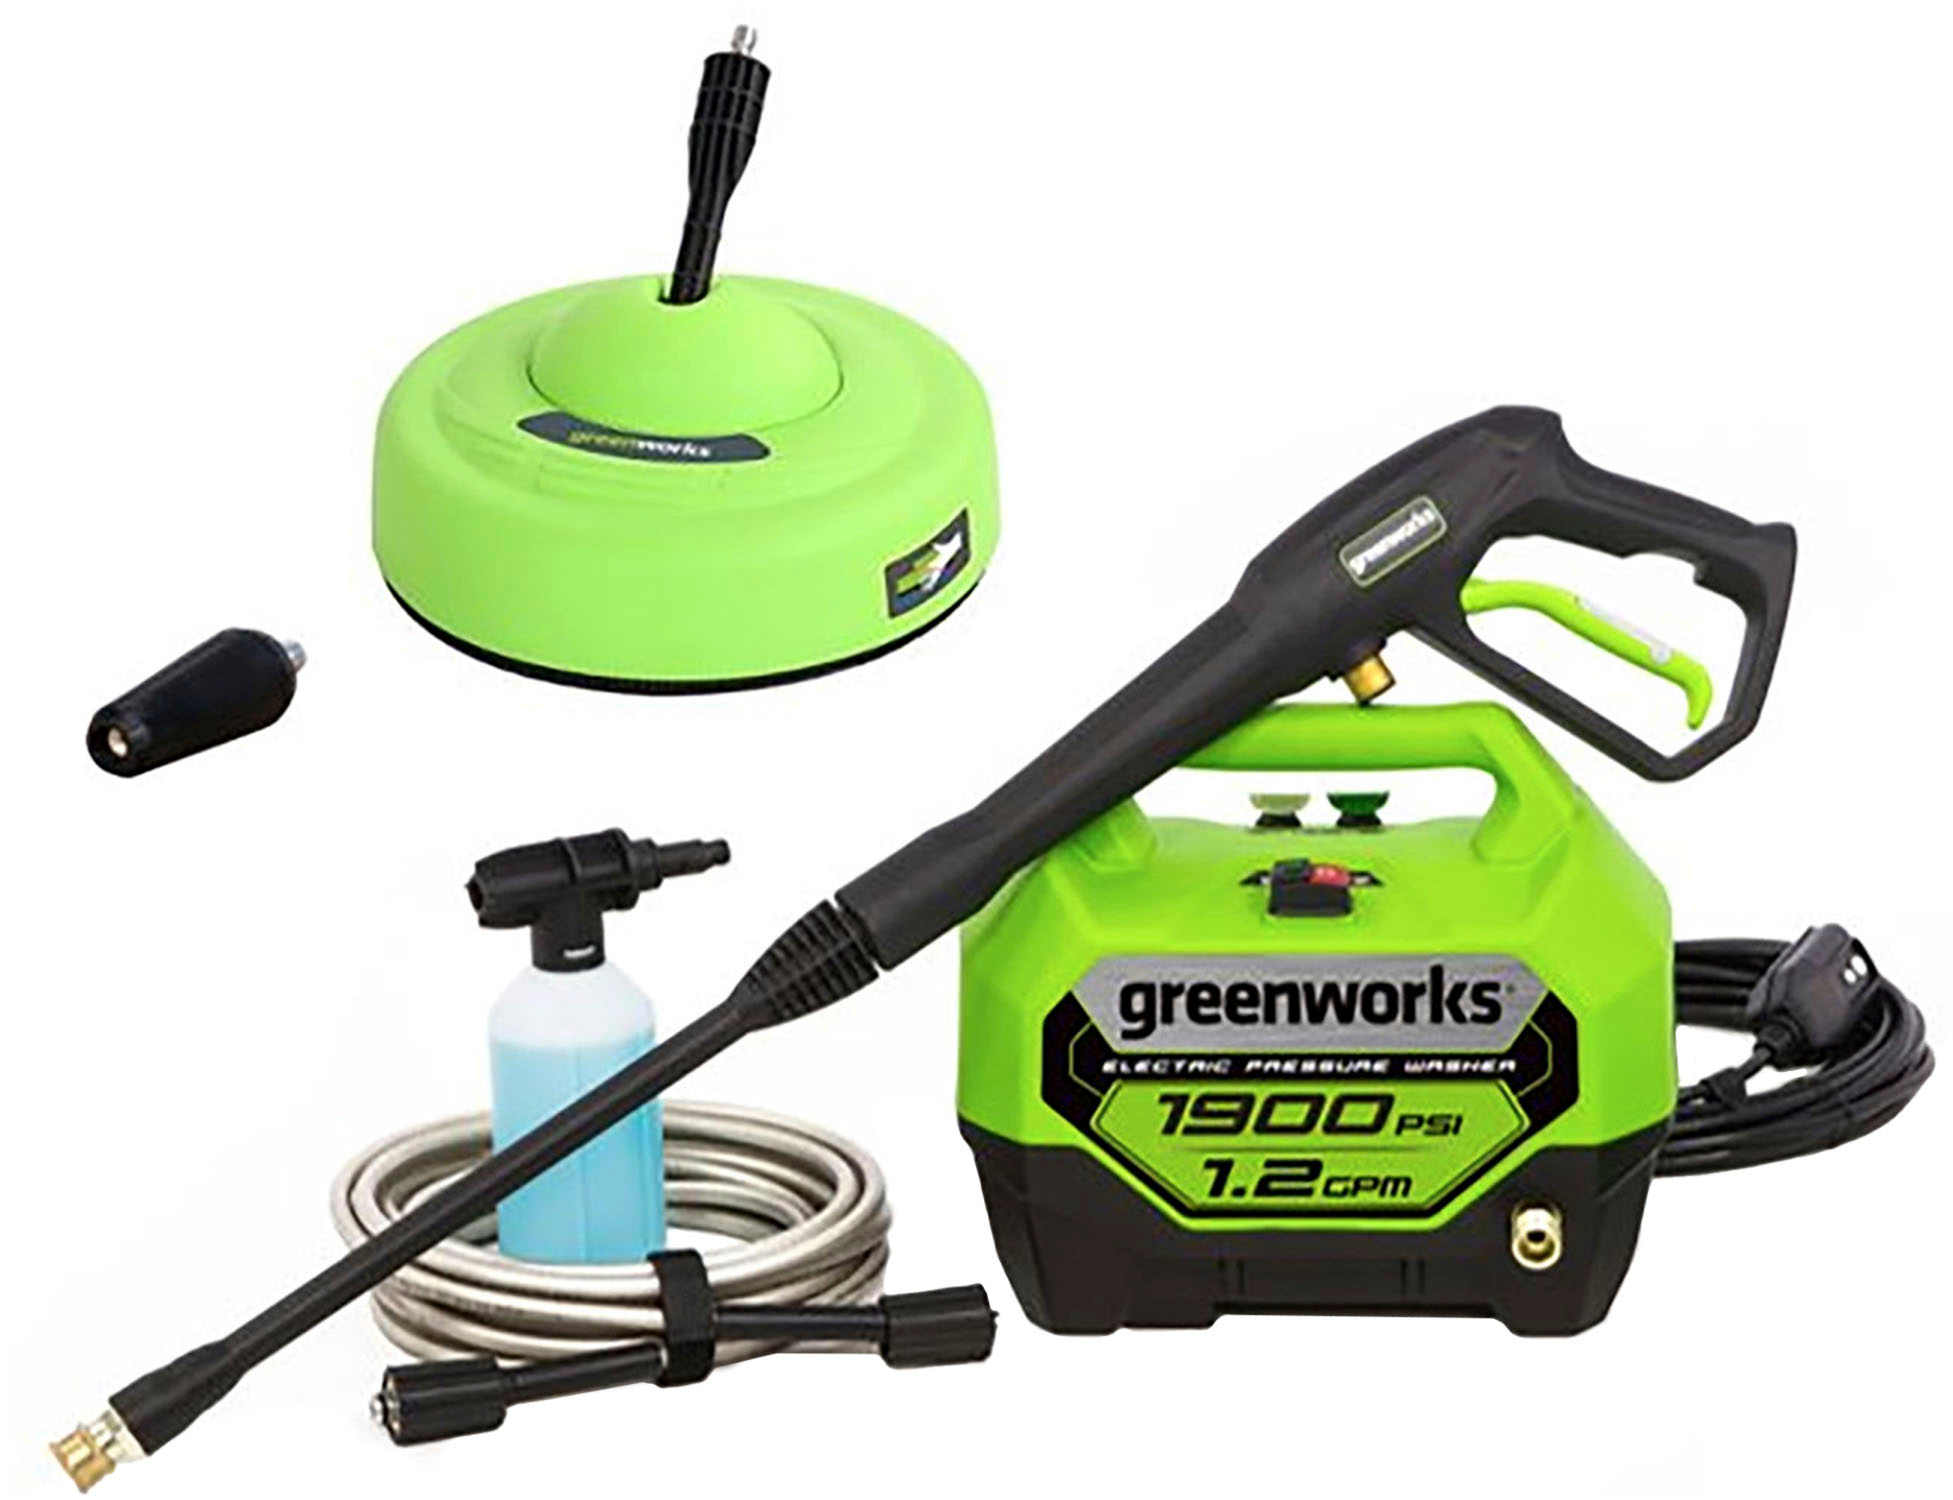 Greenworks 1900 PSI 1.2 GPM Electric Pressure Washer Combo Kit Green 5125702 - Best Buy $99.99